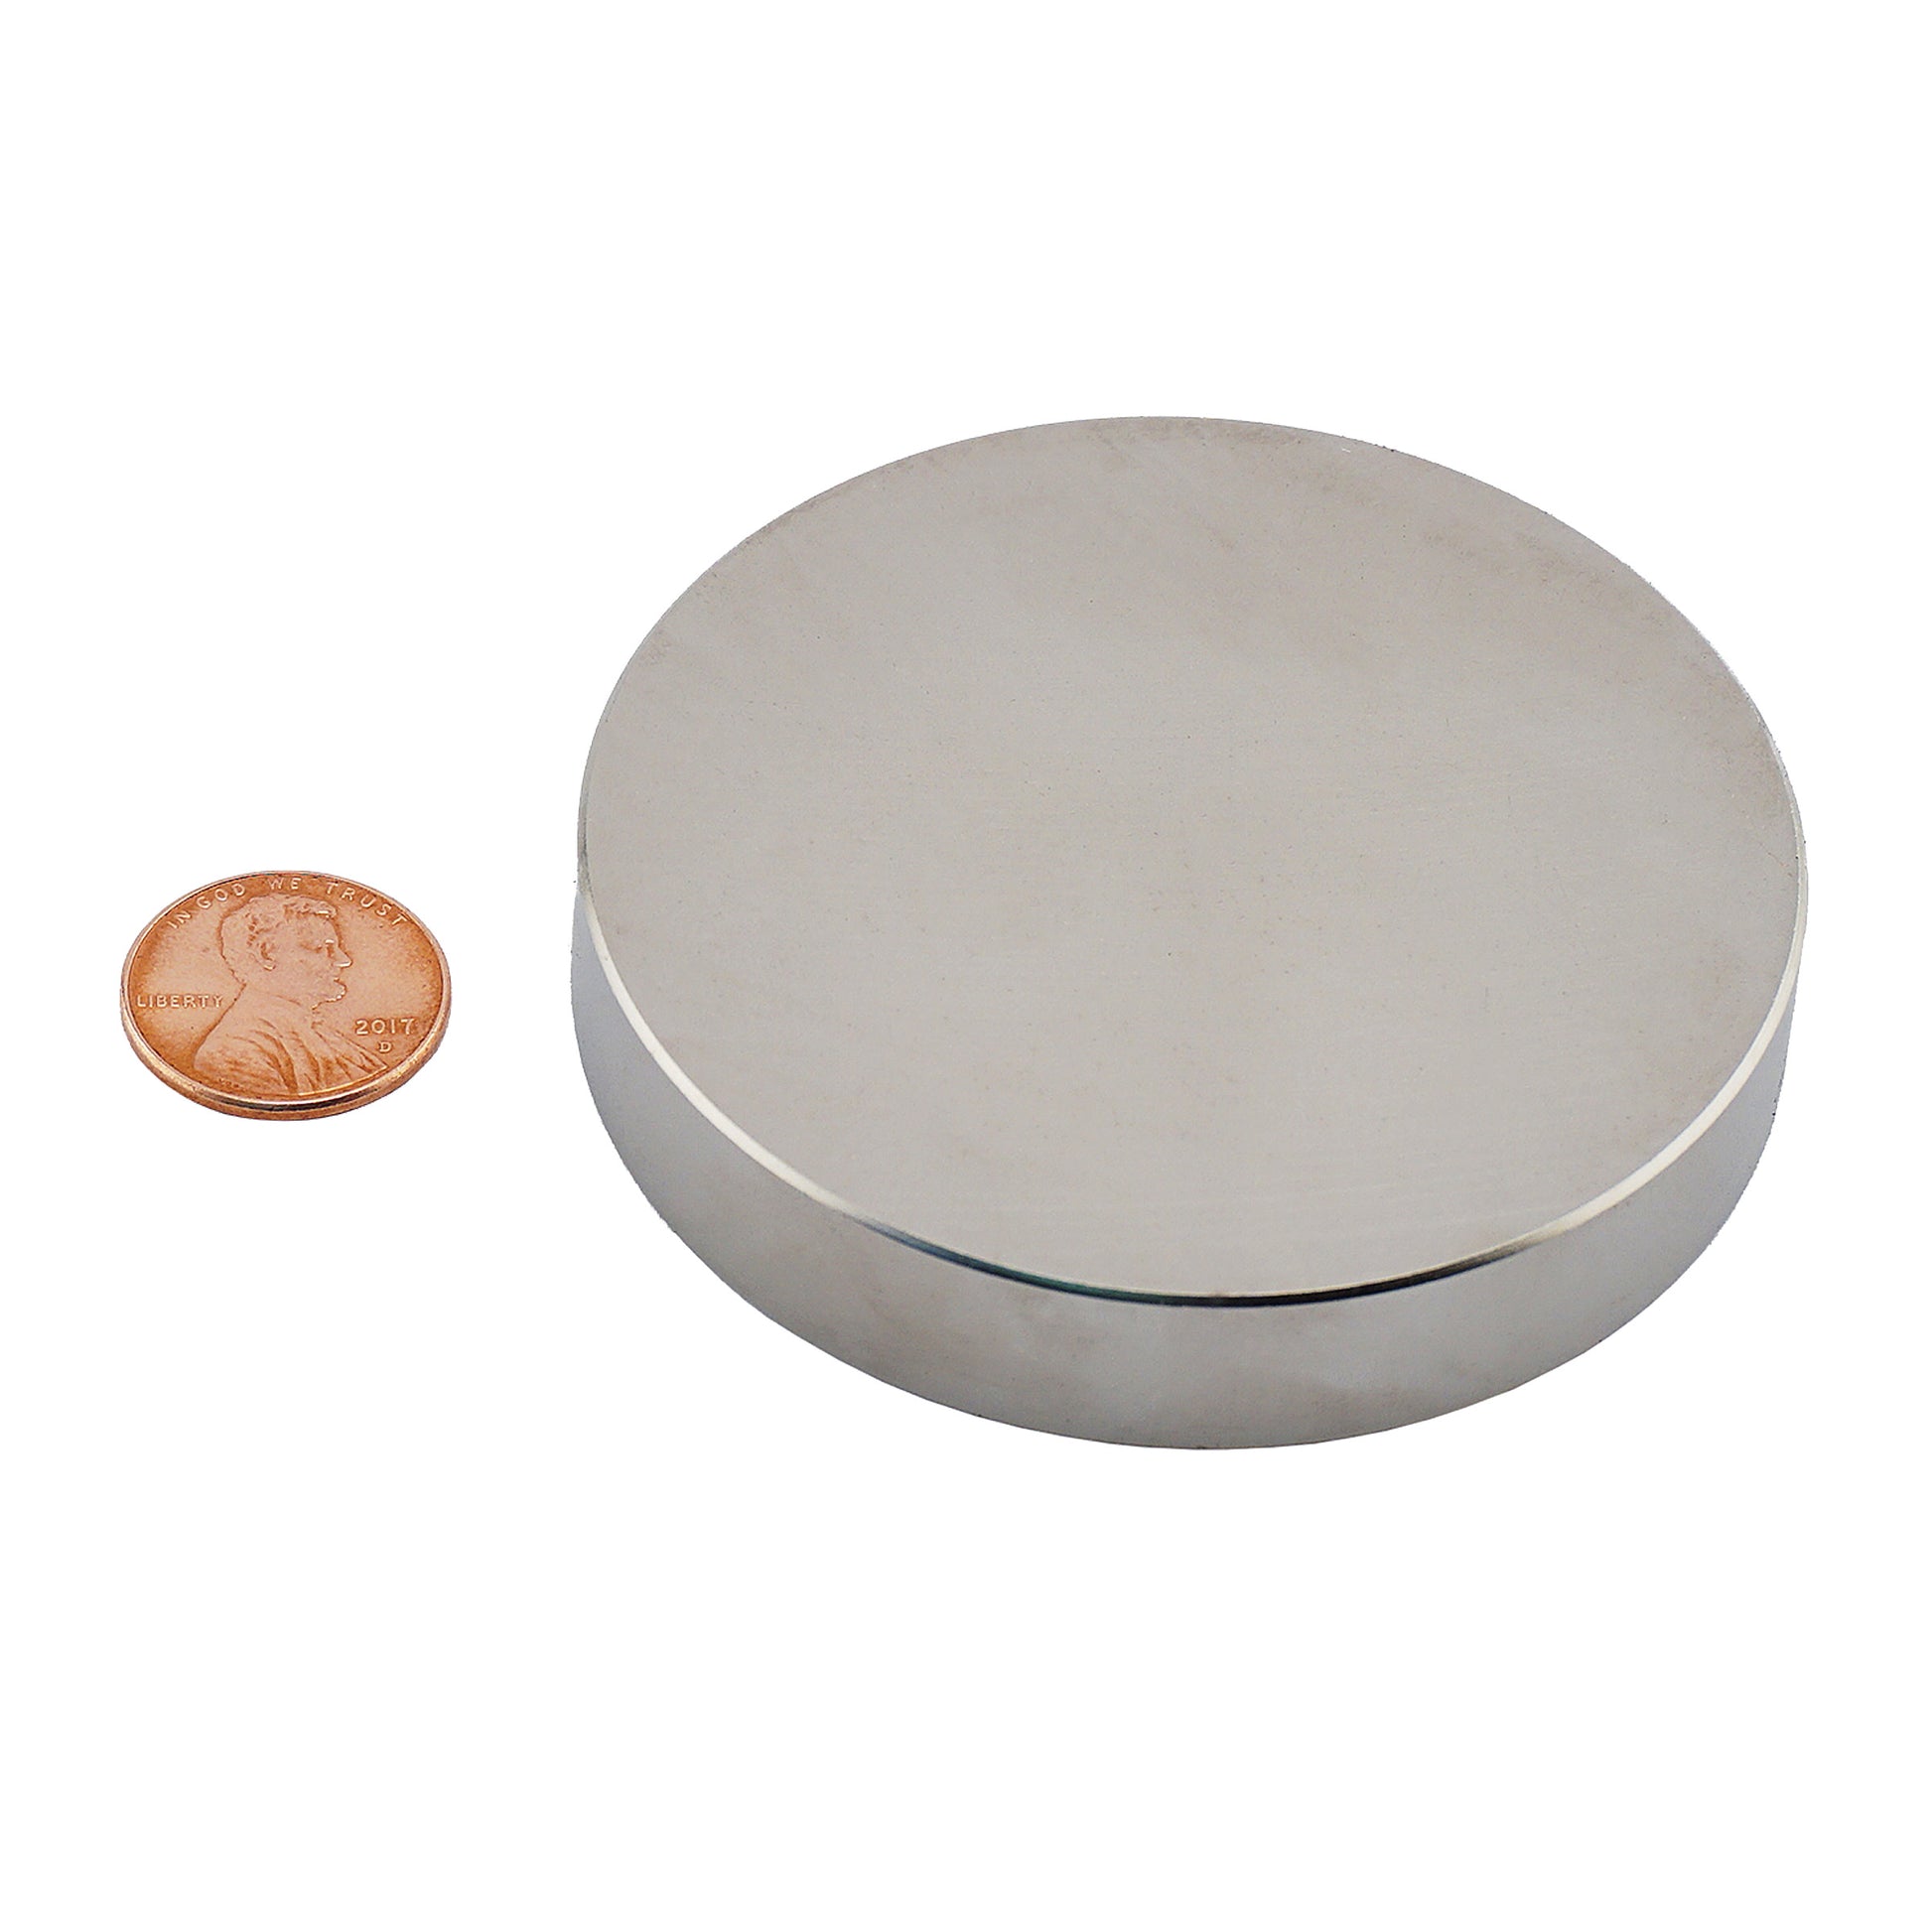 Load image into Gallery viewer, ND027502N Neodymium Disc Magnet - Compared to Penny for Size Reference